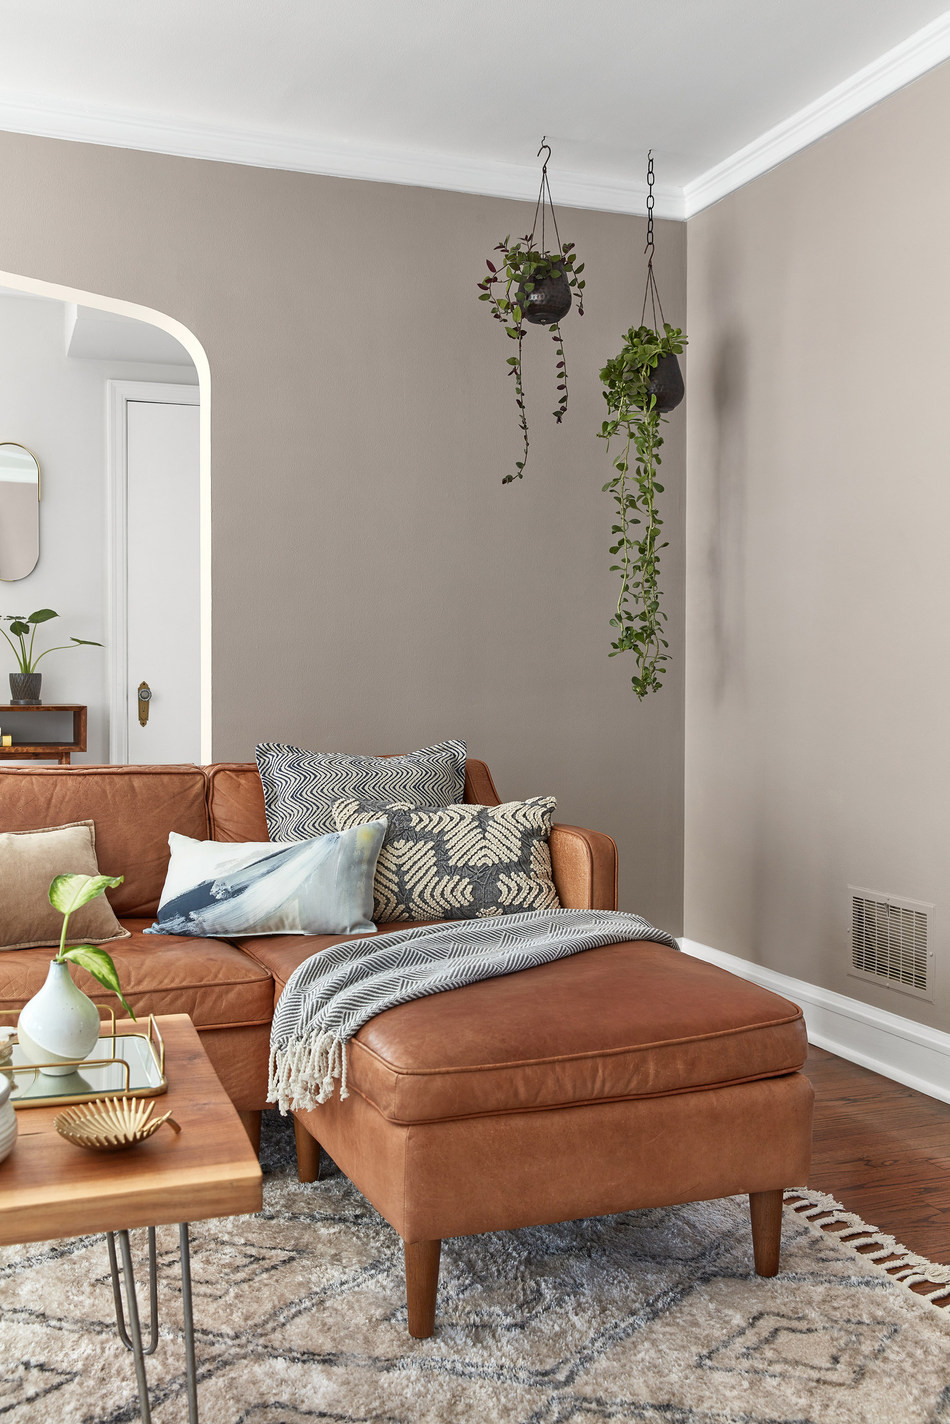 Popular Living Room Colors 2020
 Valspar Announces 2020 Colors of the Year Inspired by Nature